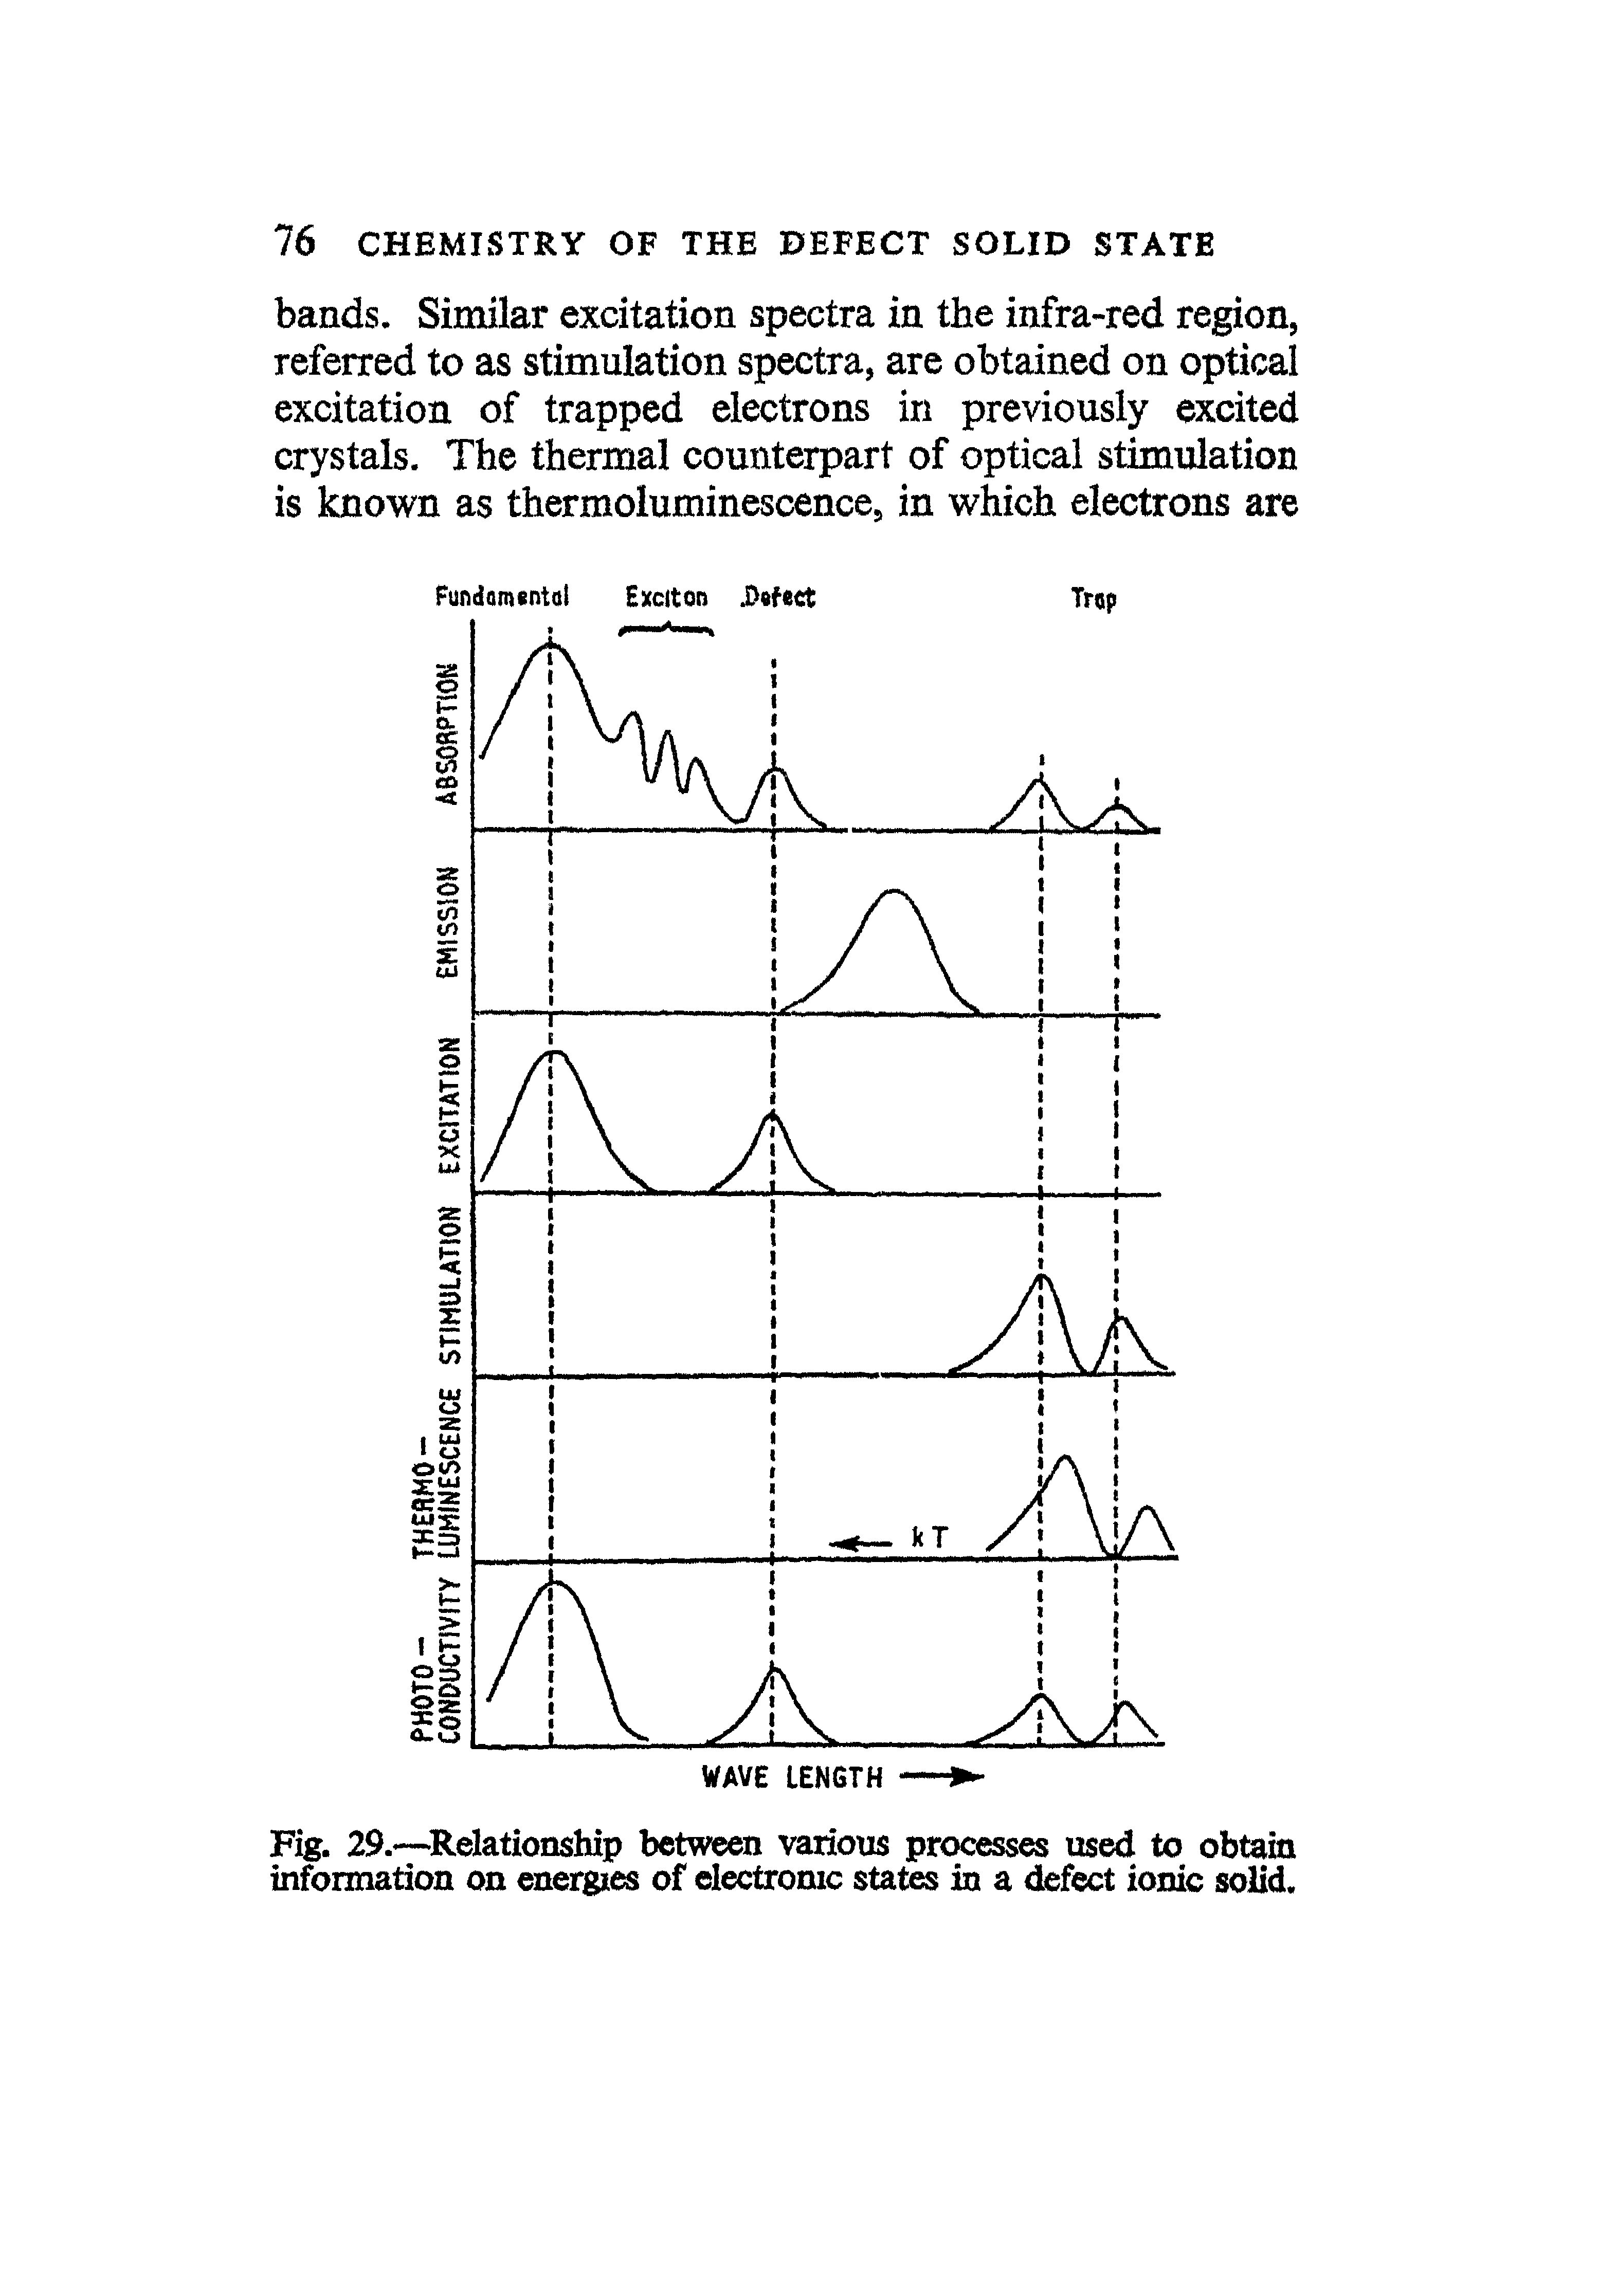 Fig. 29.— Relationship between various processes used to obtain information on energies of electronic states in a defect ionic solid.